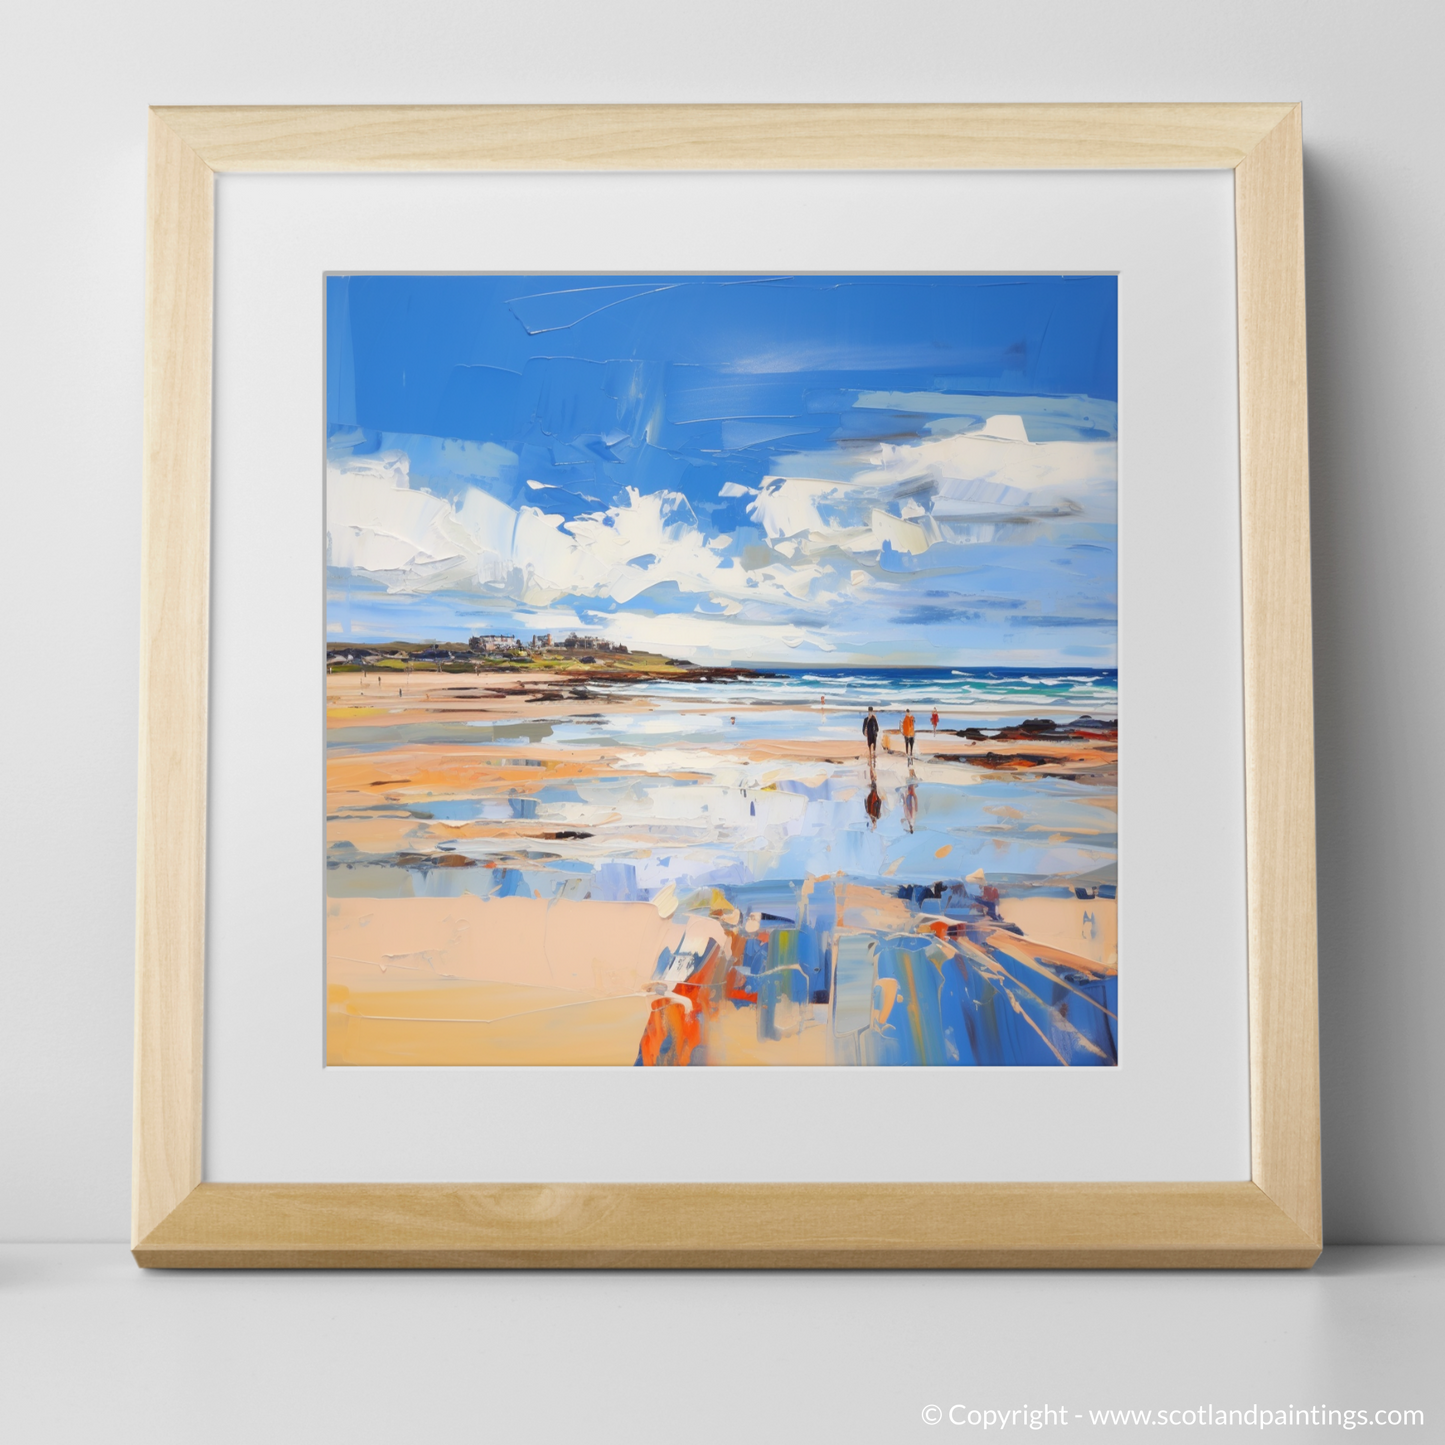 Art Print of West Sands, St Andrews with a natural frame